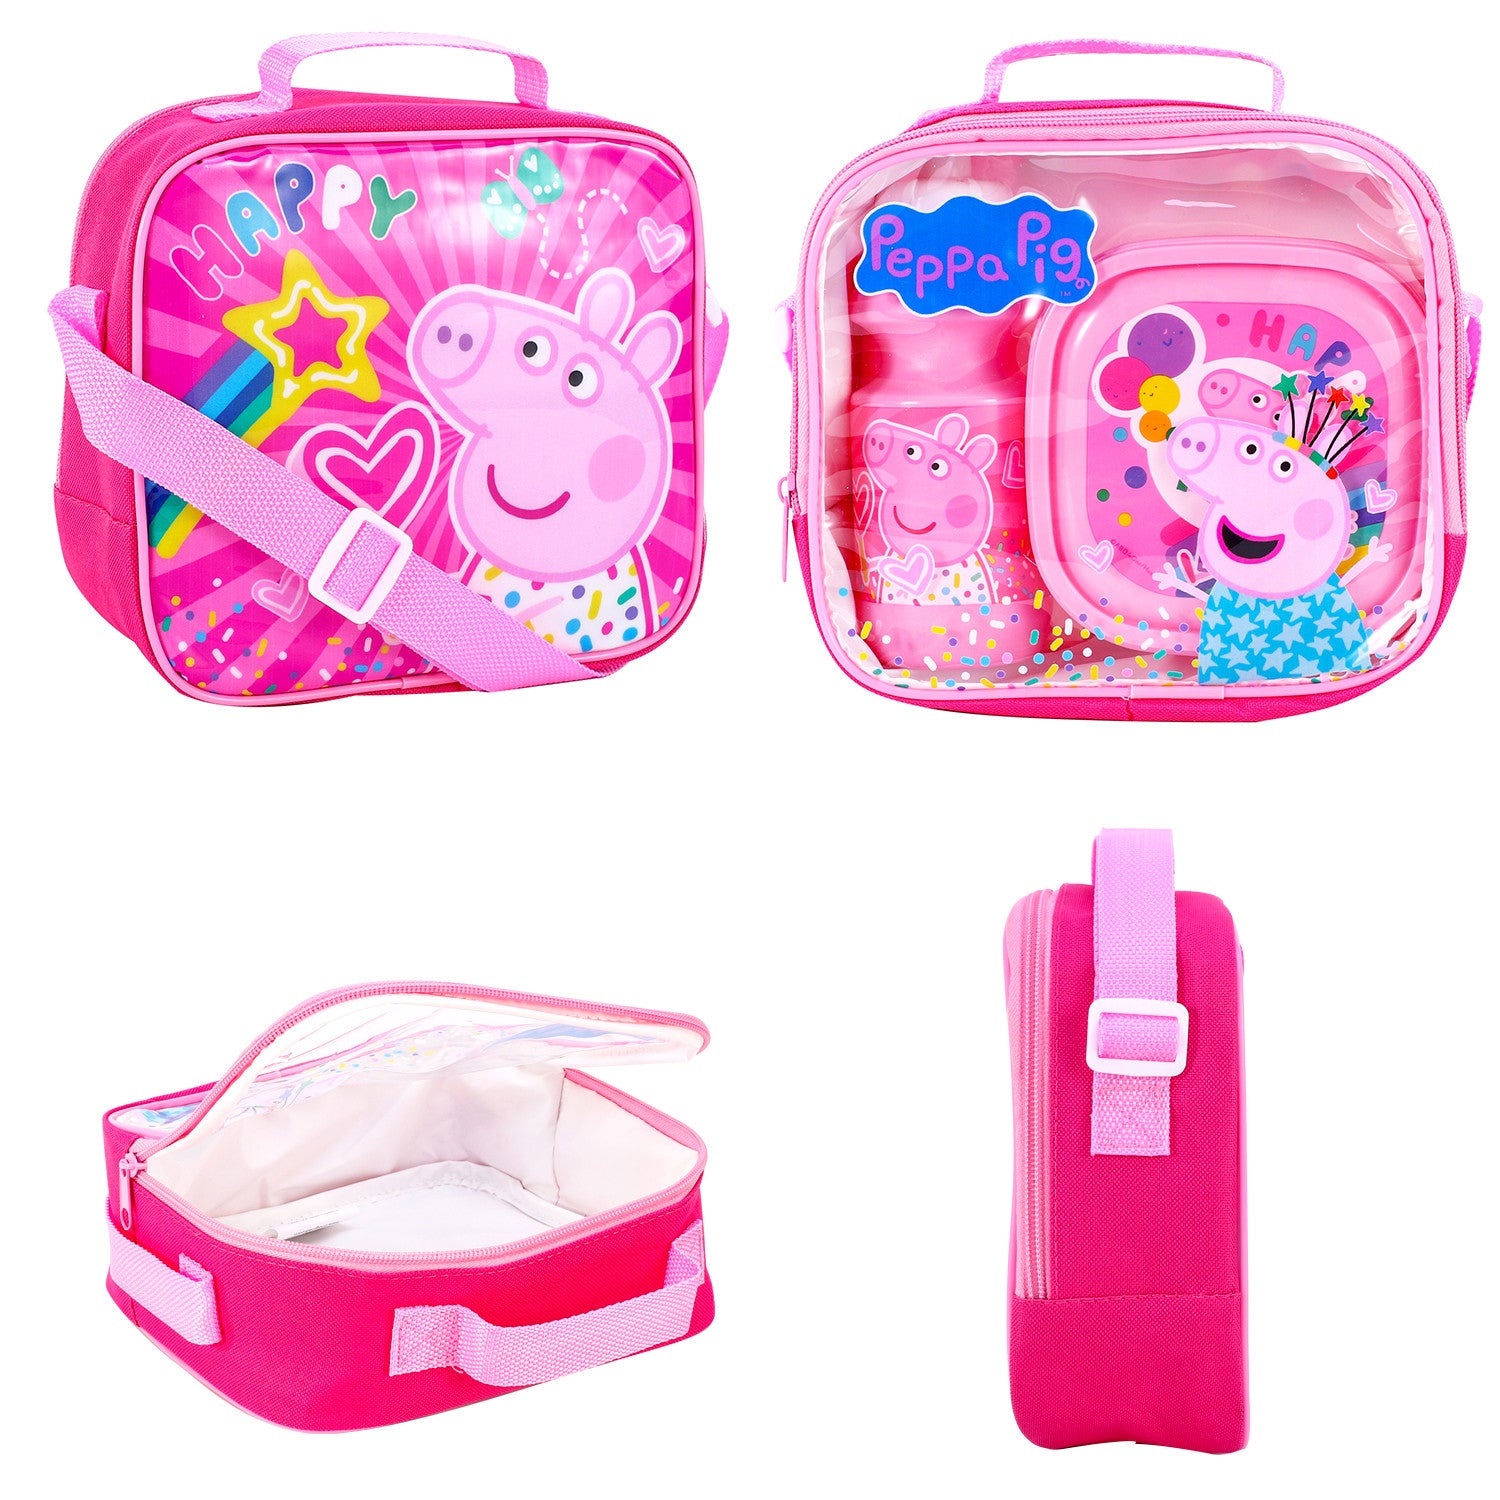 Buy Peppa Products Online at Best Prices in India | Ubuy